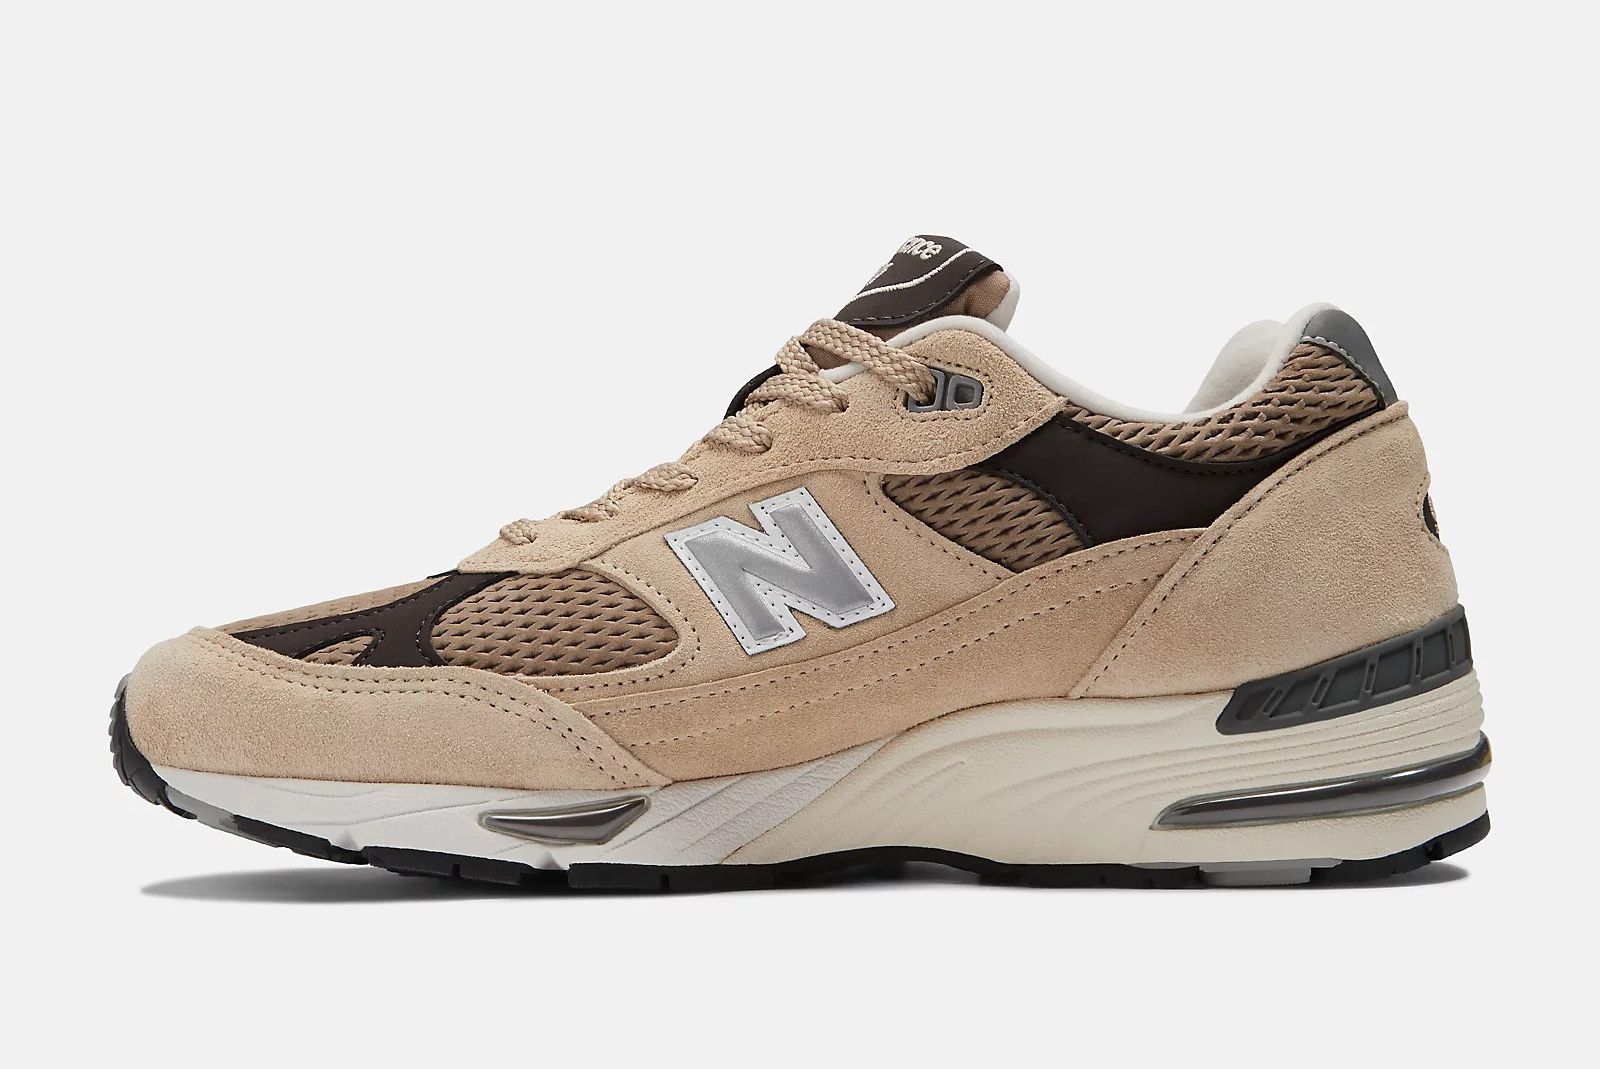 New Balance's 991 'Finale Pack' Is All About the Neutrals - Sneaker Freaker